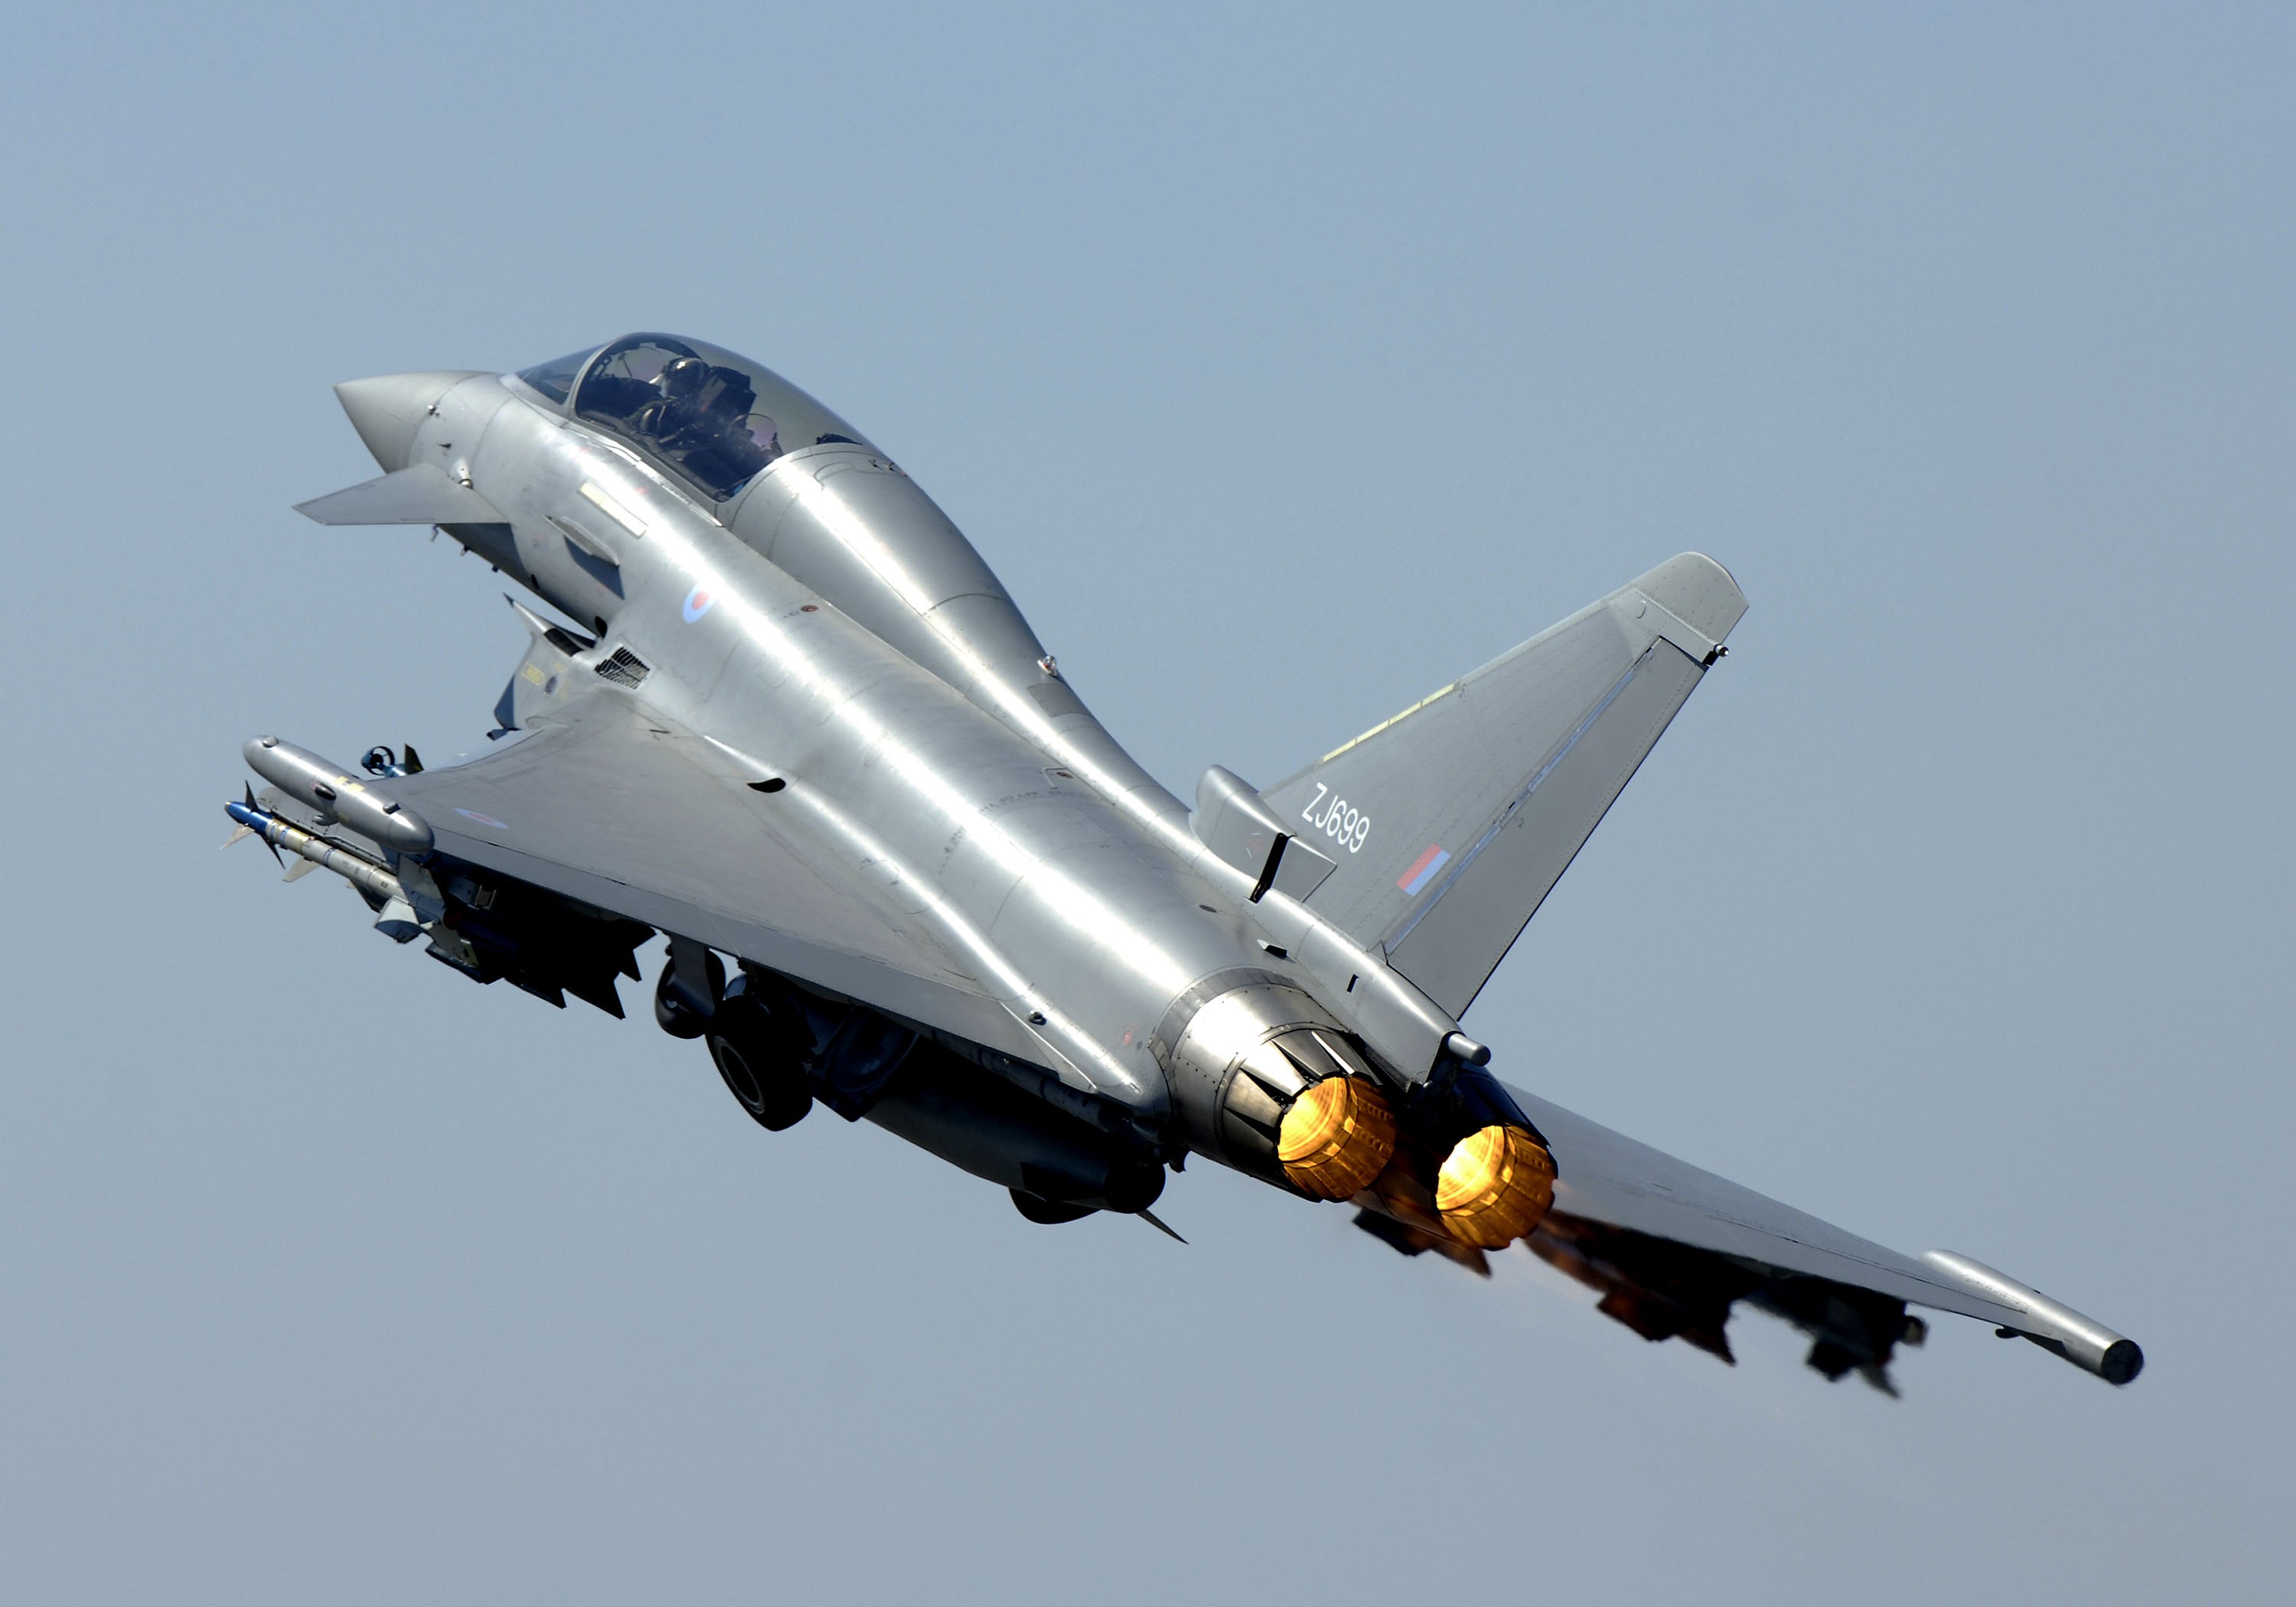 General 3000x2100 Eurofighter Typhoon Royal Air Force military aircraft military aircraft military vehicle vehicle